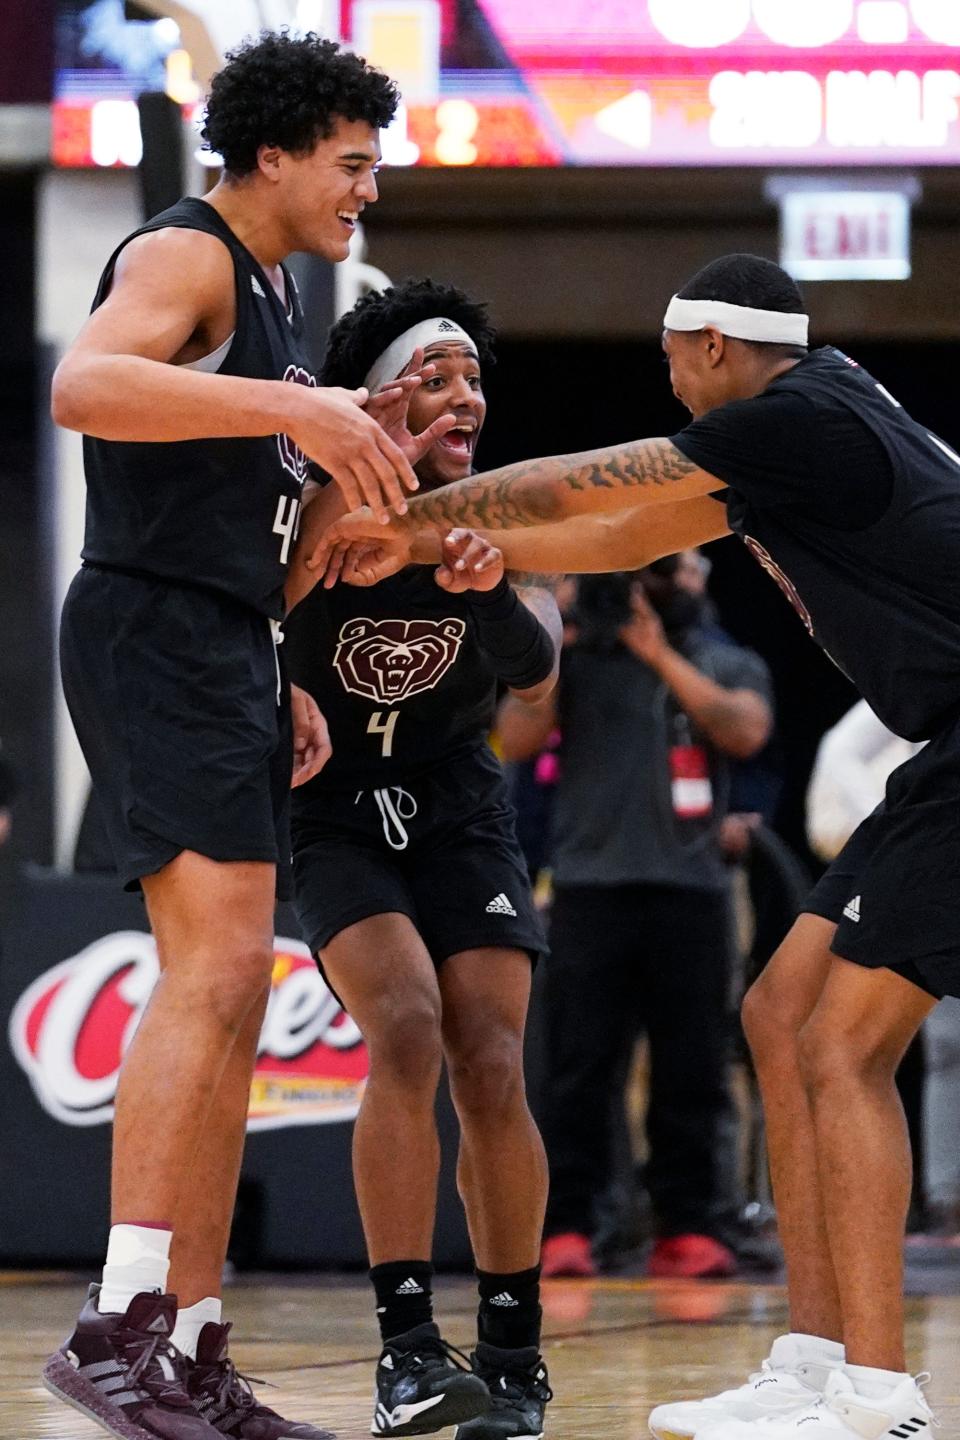 Missouri State forward Gaige Prim, left, celebrates with guards Ja'Monta Black, center, and Isiaih Mosley after they defeated Loyola Chicago in an NCAA college basketball game in Chicago, Saturday, Jan. 22, 2022. (AP Photo/Nam Y. Huh)